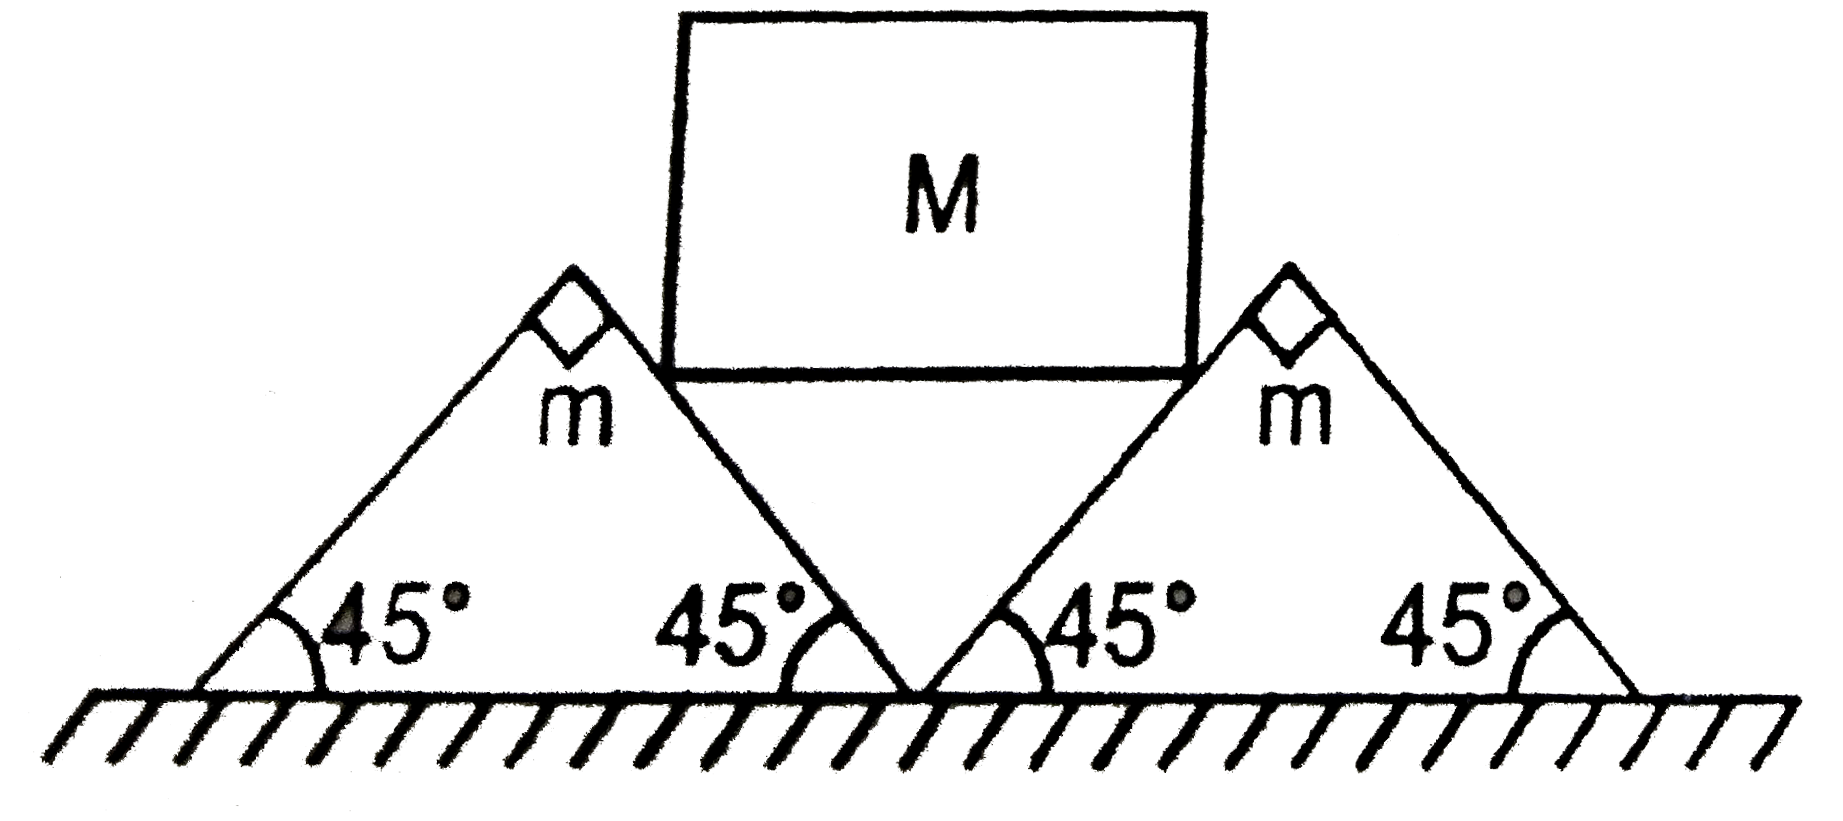 Two wedges, each of mass m, are placed next to each other on a flat horizontal floor. A cube of mass M is balanced on the wedges as shown in figure. Assume no friction  between the cube and the wedges, but a coefficent of static friction mult1 between the wedges and the floor. What is the largest M that can be balanced as shown without motion of the wedges ?